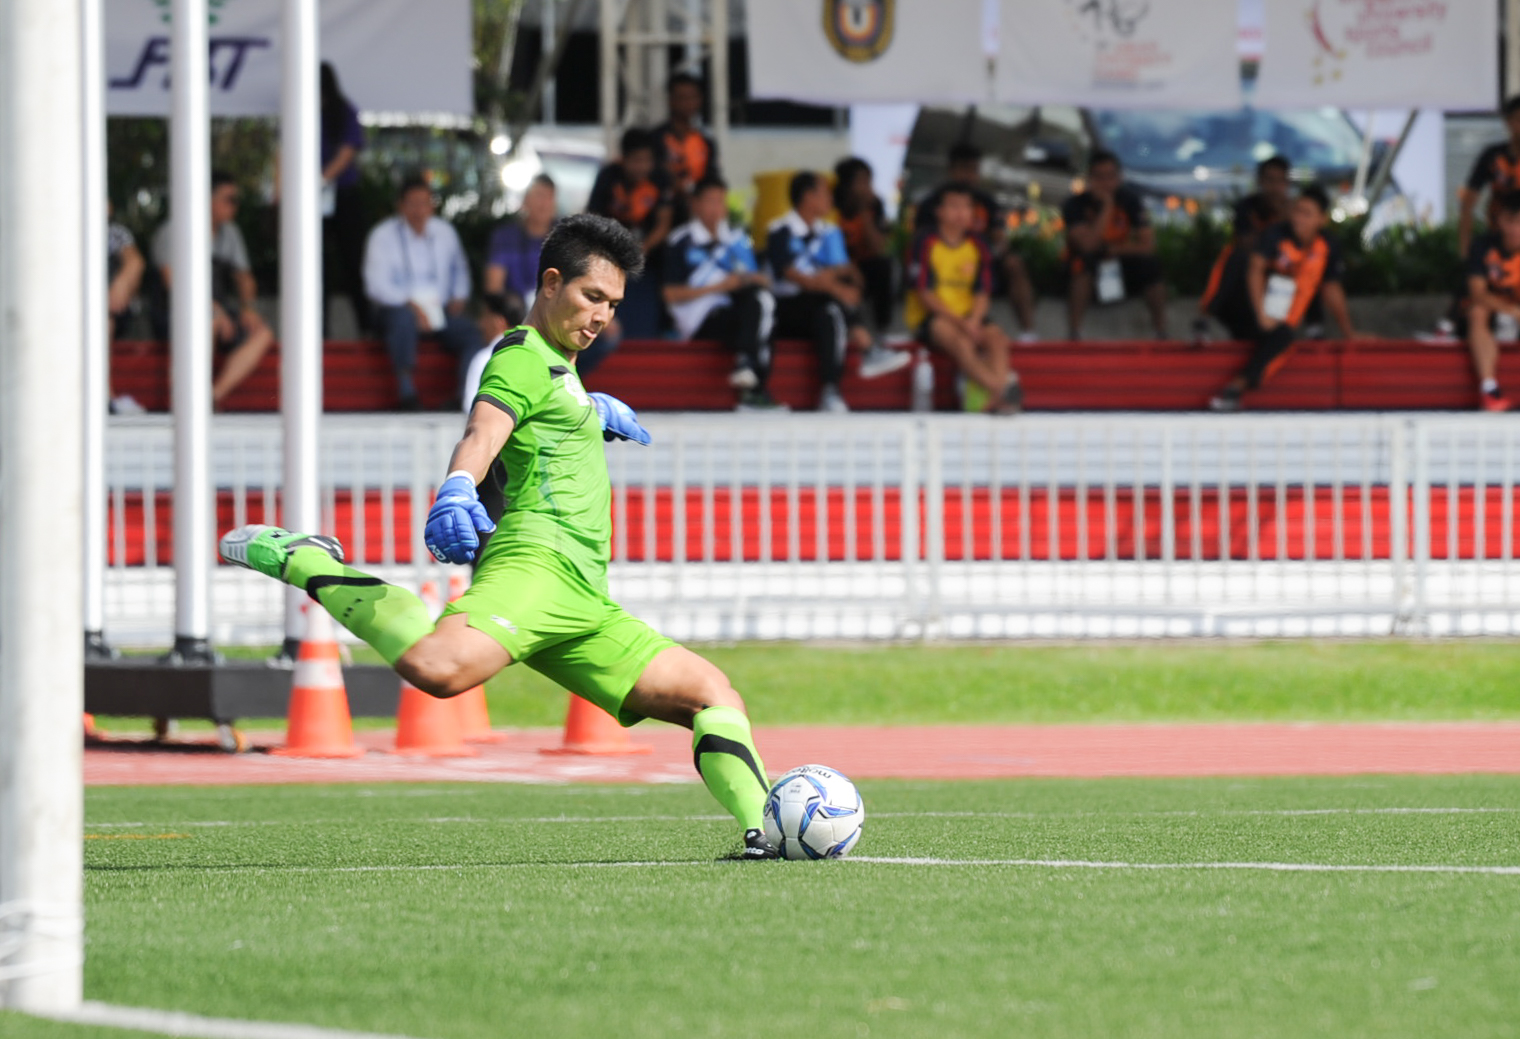 The Laotian goal keeper kicks the ball during the soccer competition of the ASEAN University Games at the Nanyang Technological University.